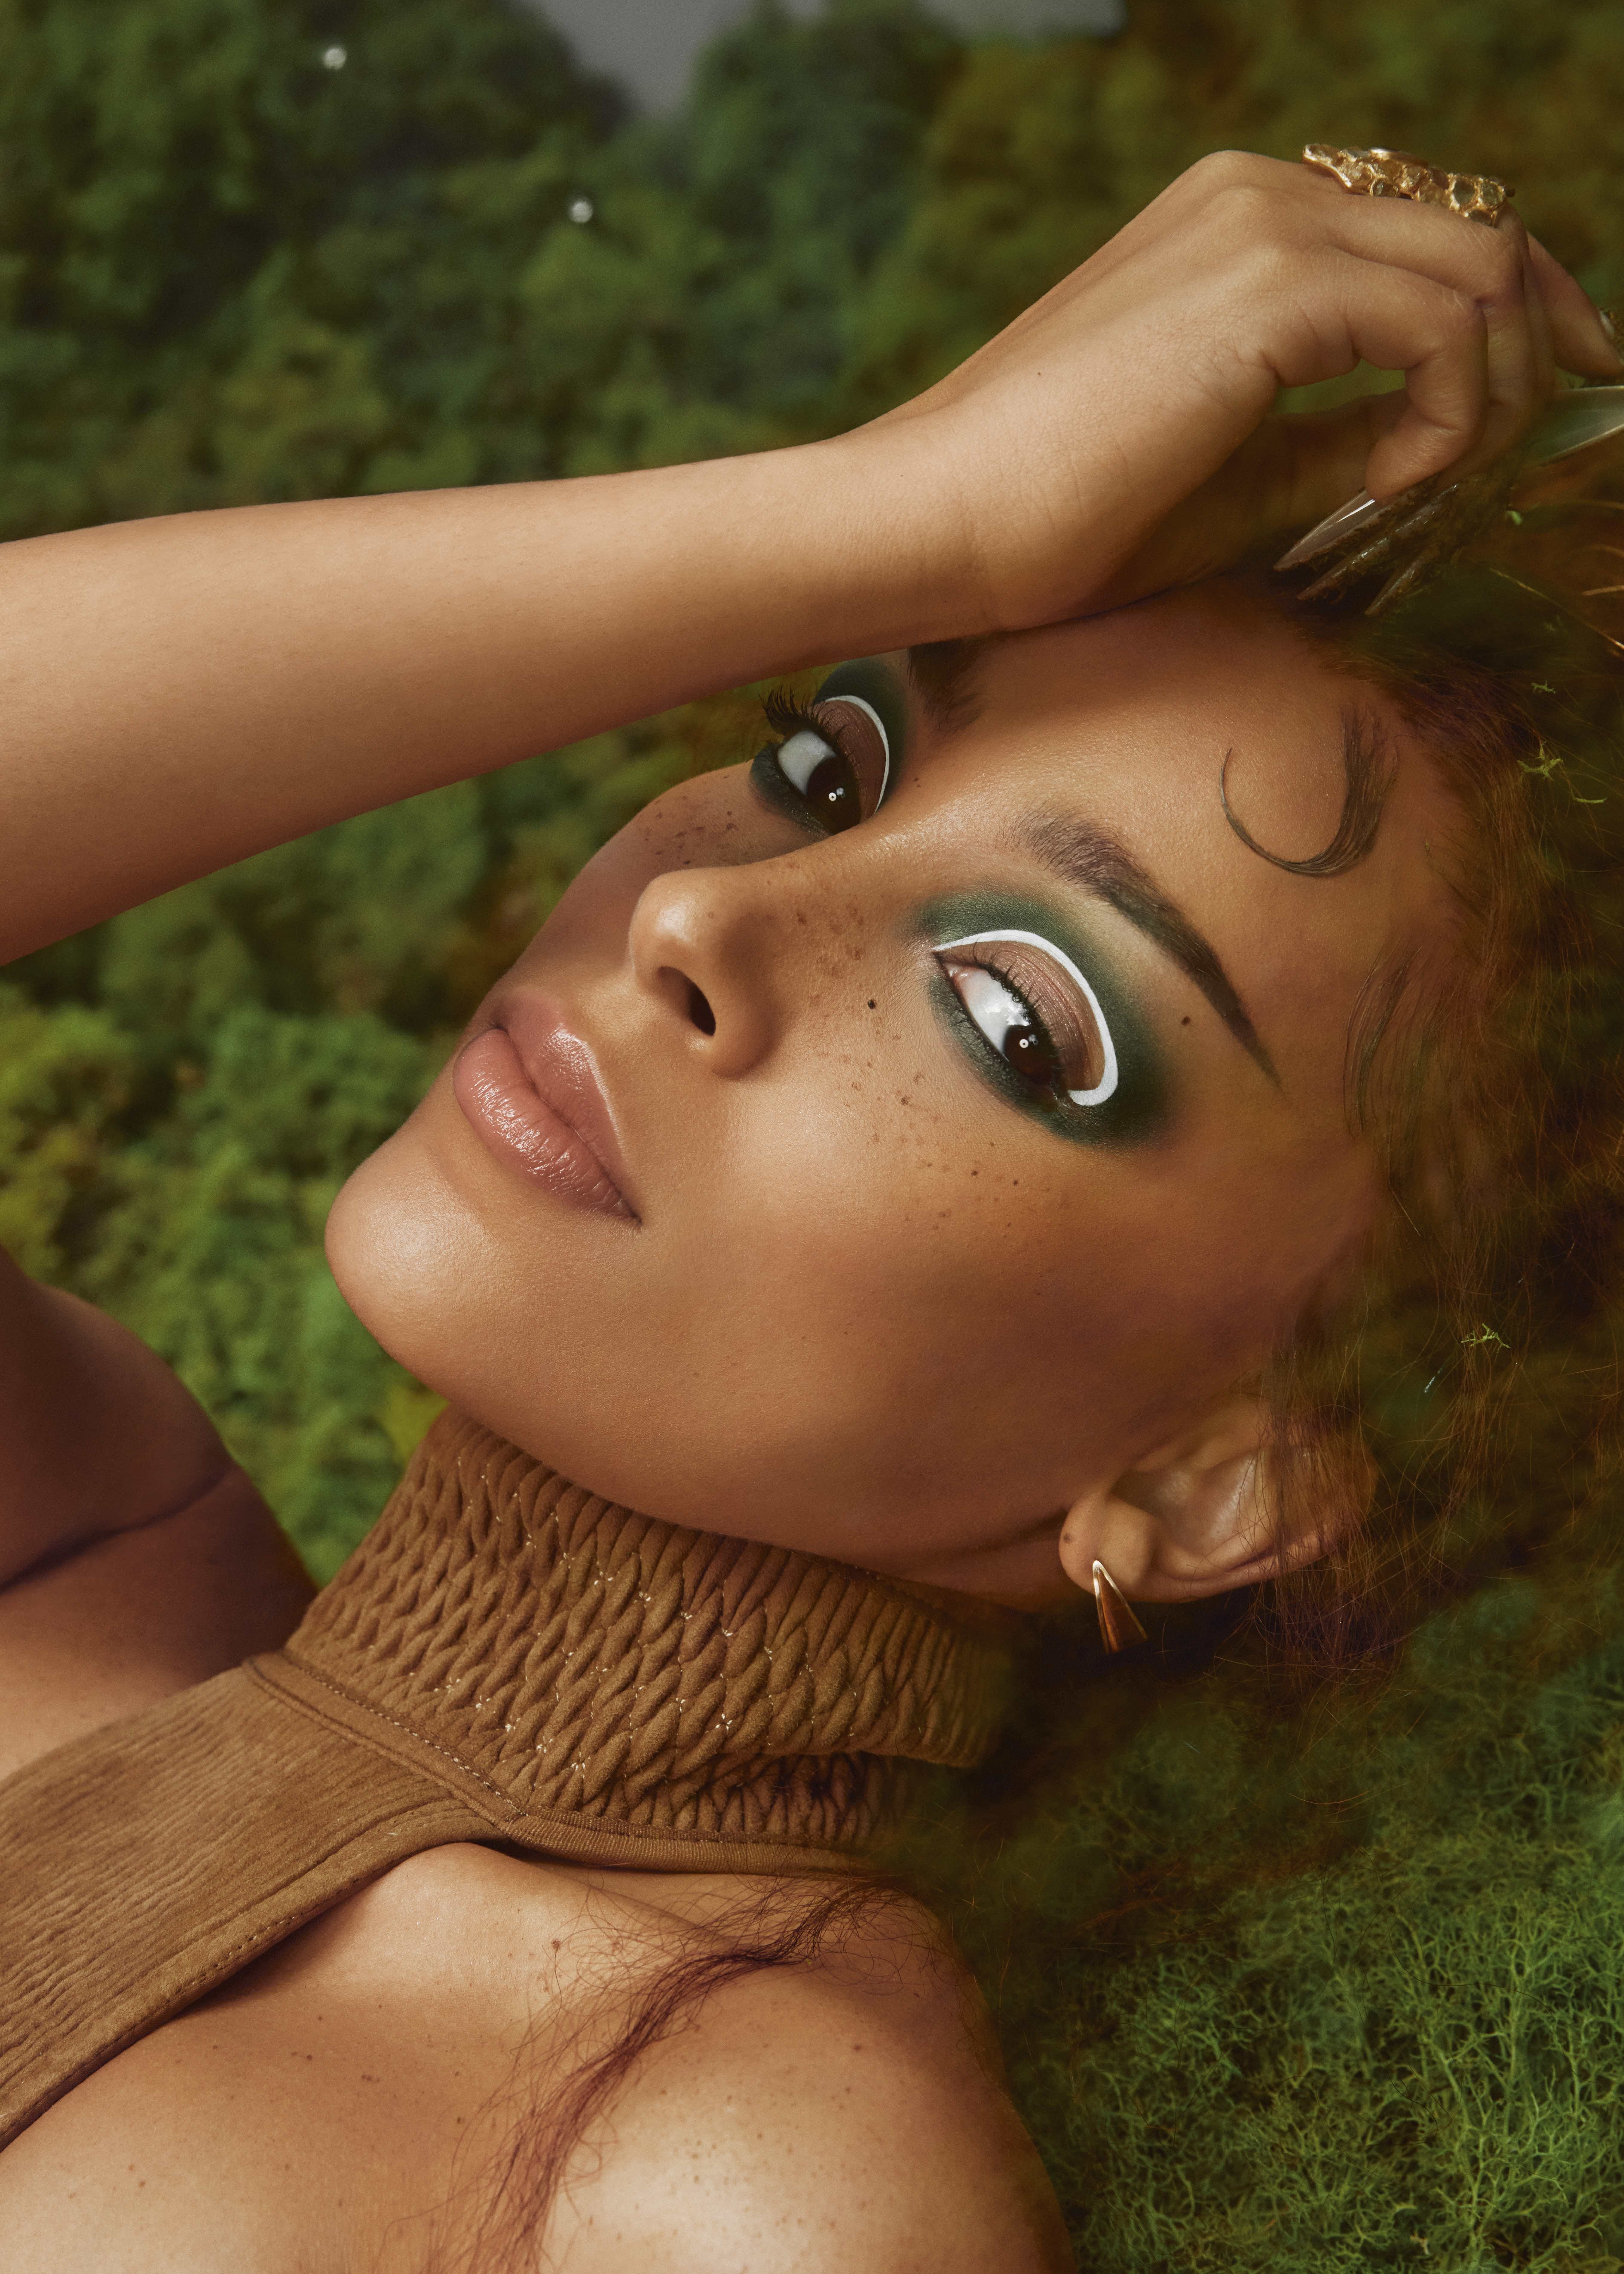 Shop Doja Cat's first-ever makeup line with BH Cosmetics